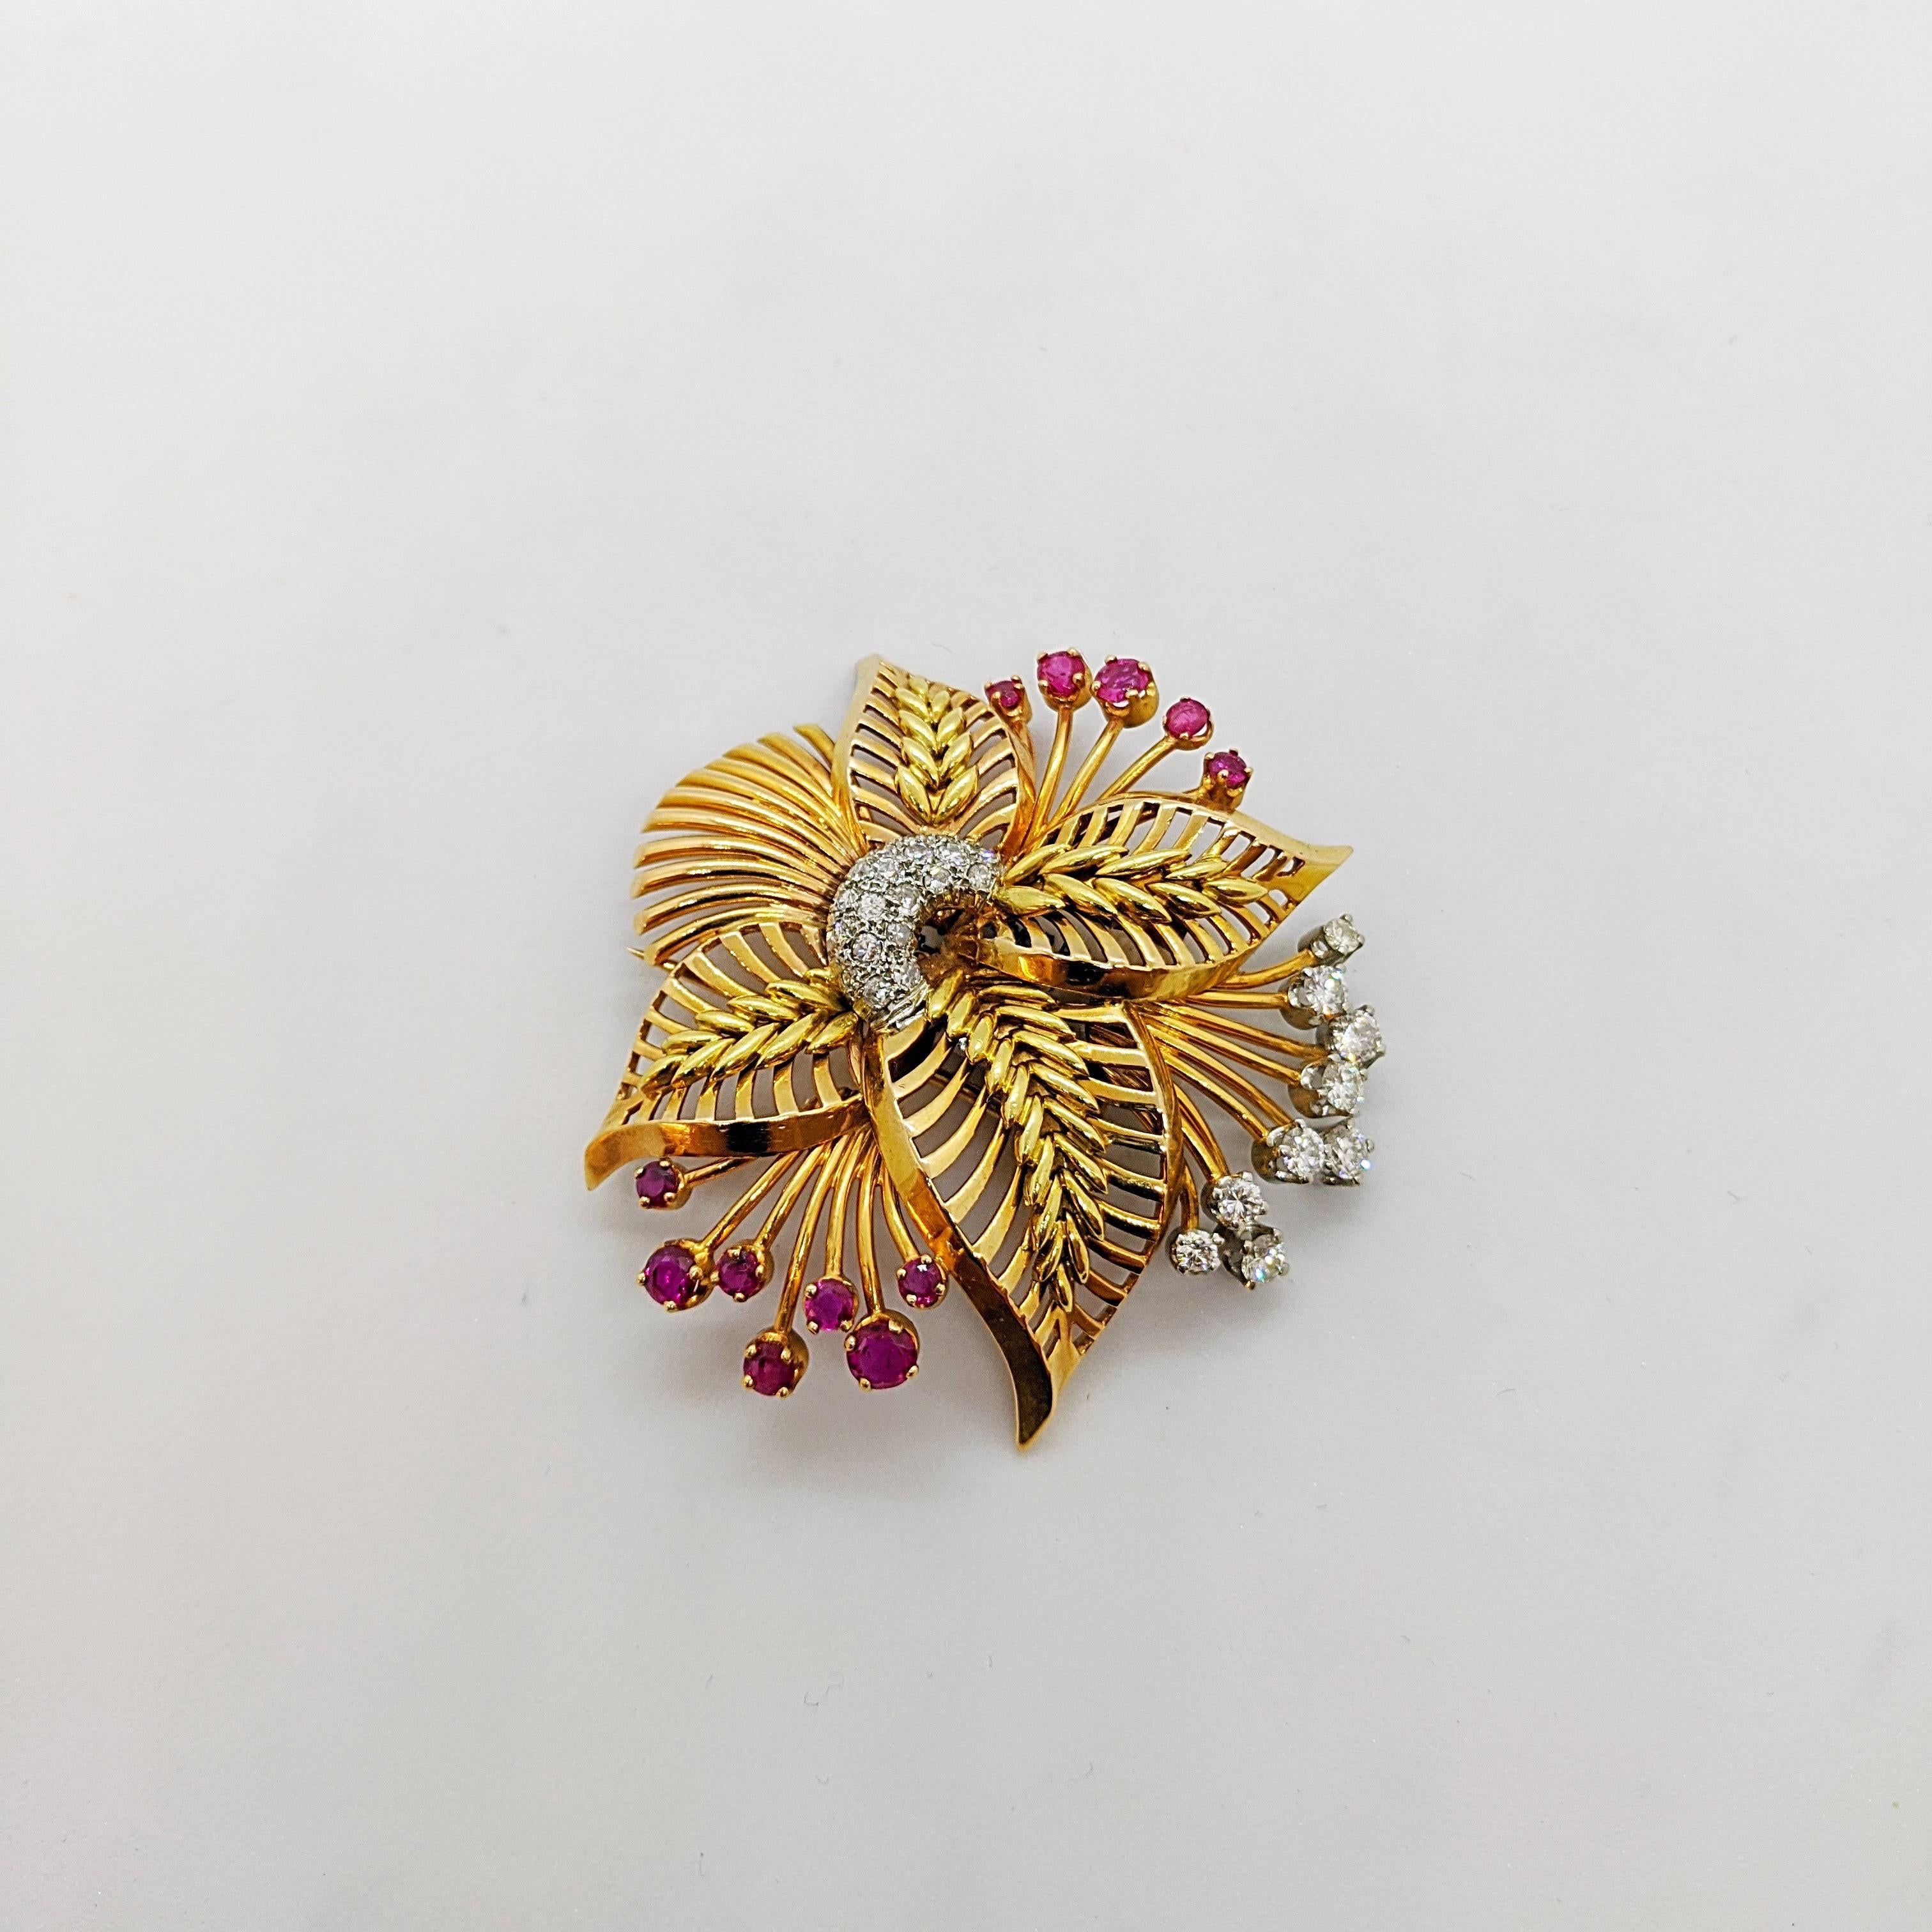 18 Karat Rose Gold Brooch with Diamonds and Rubies, circa 1940s In Excellent Condition For Sale In New York, NY